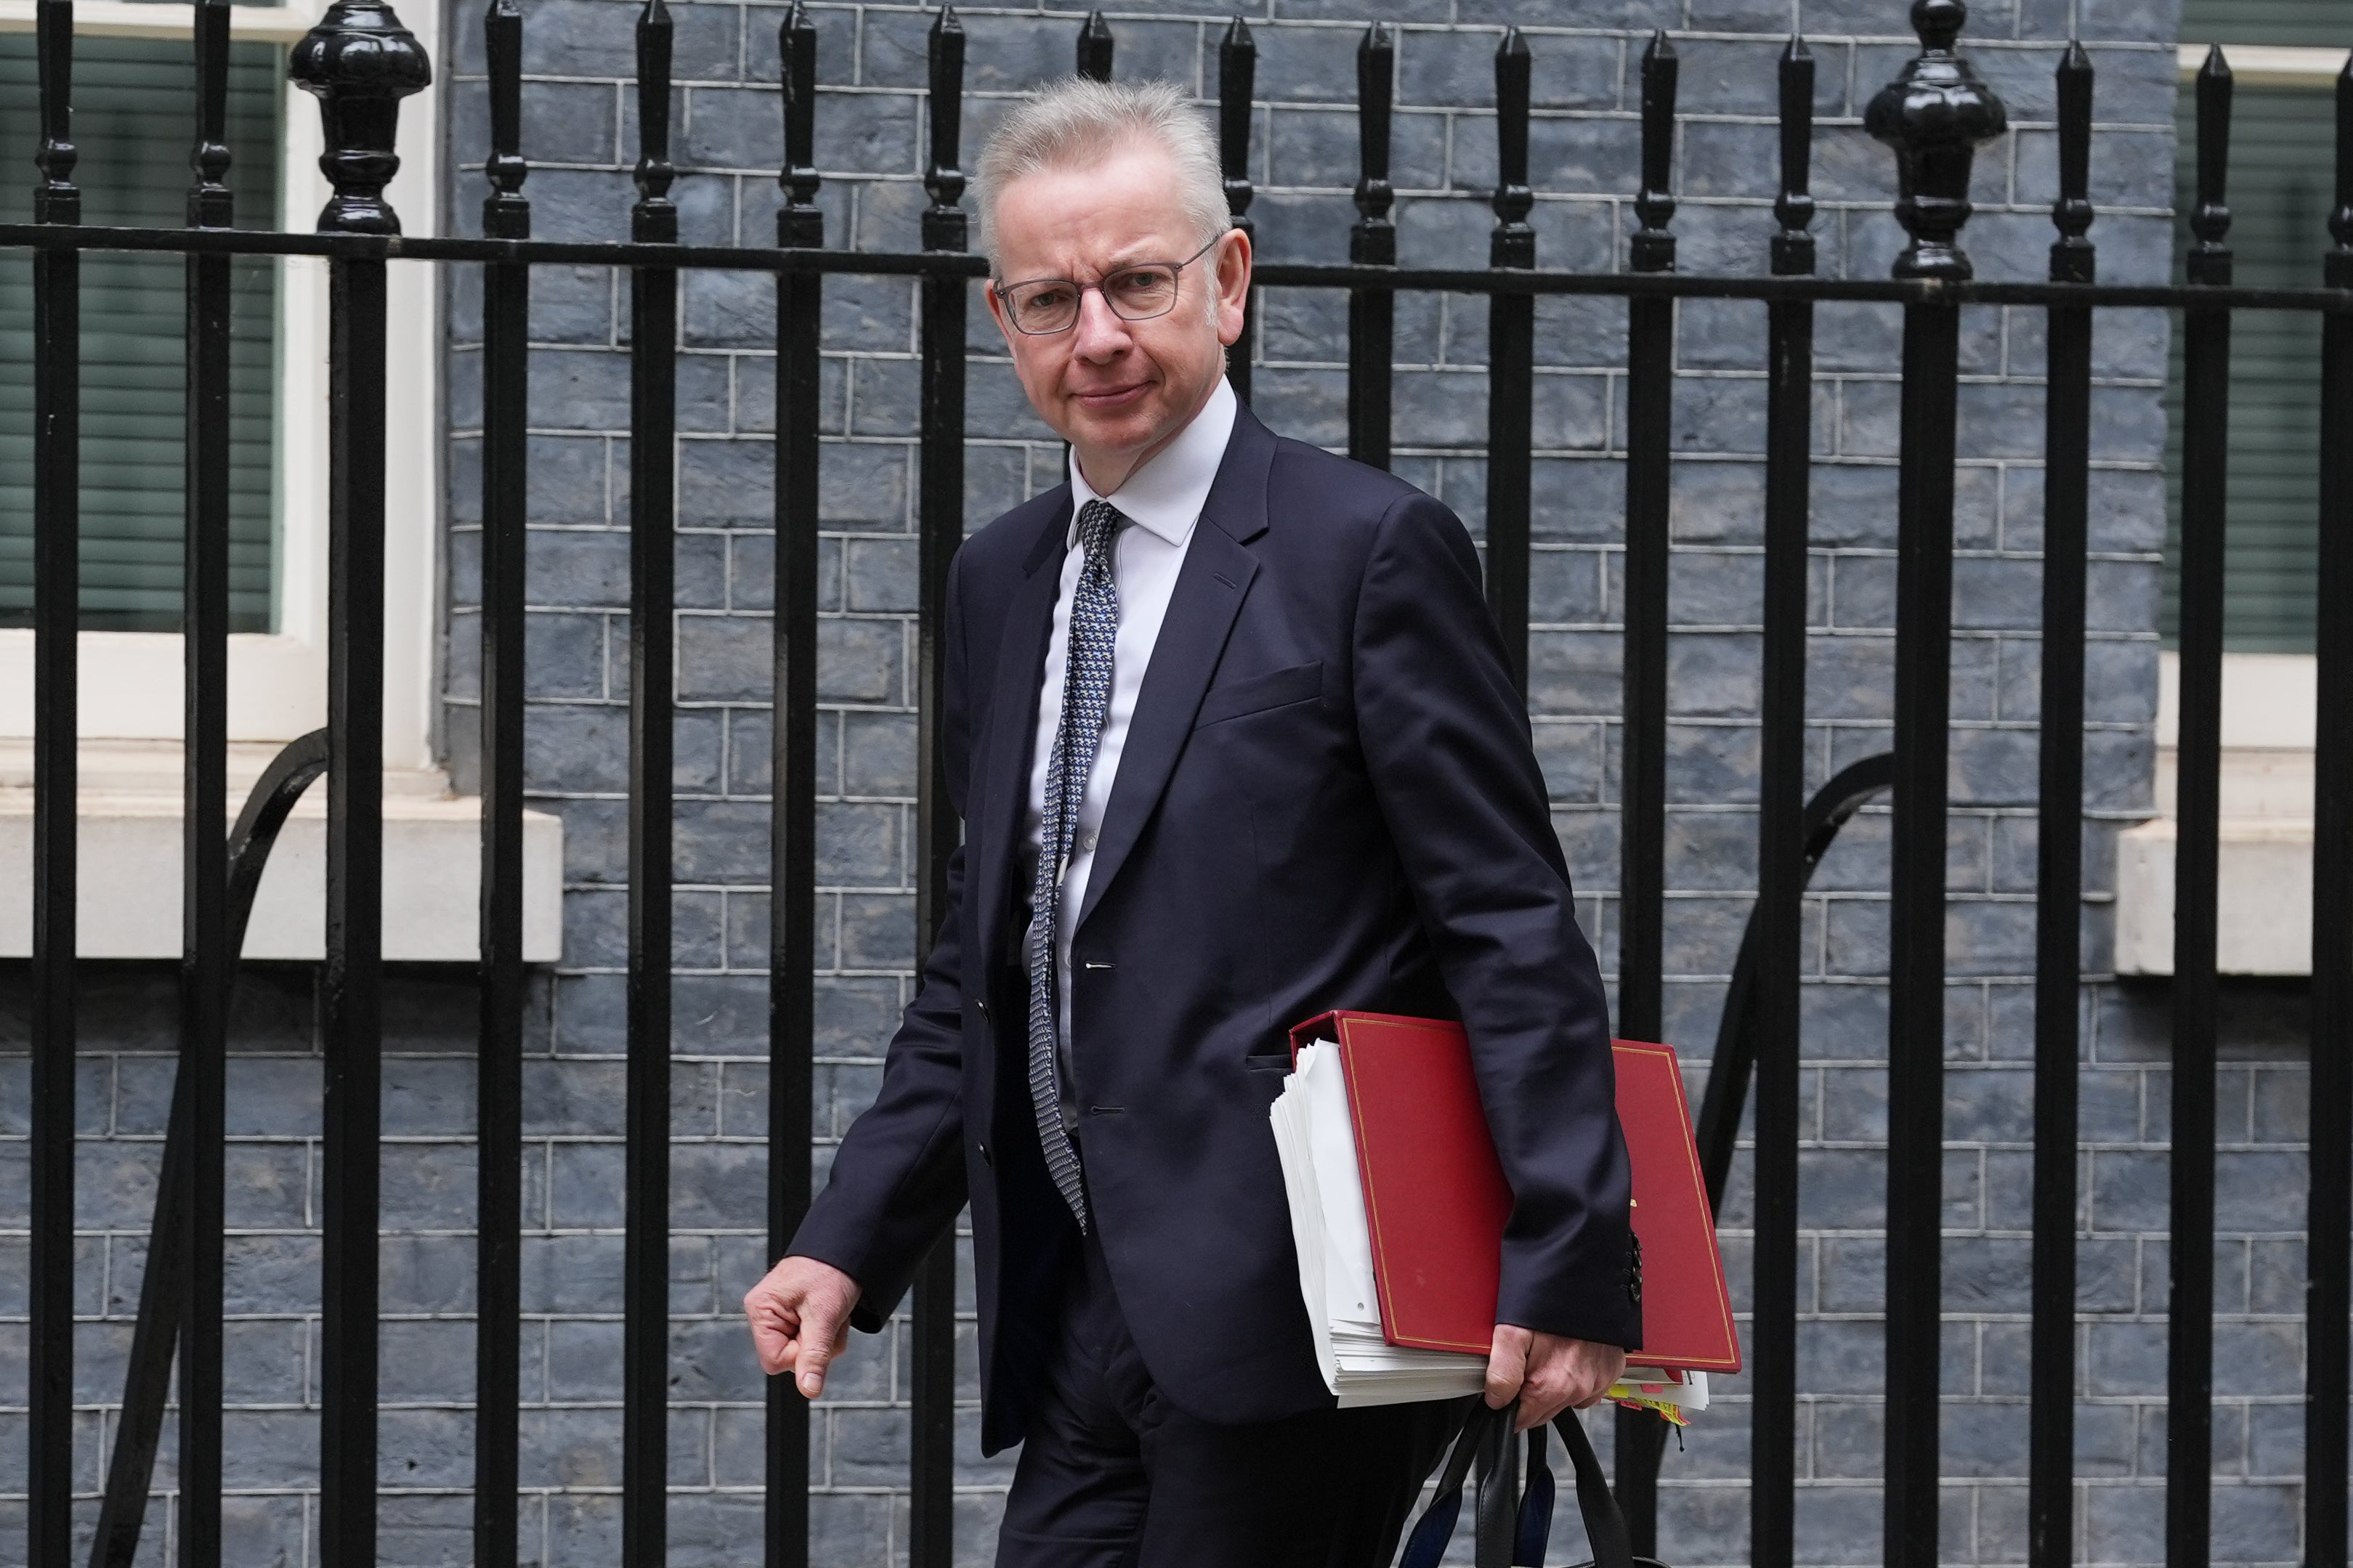 Levelling Up secretary Michael Gove had pledged to end no fault evictions before the general election